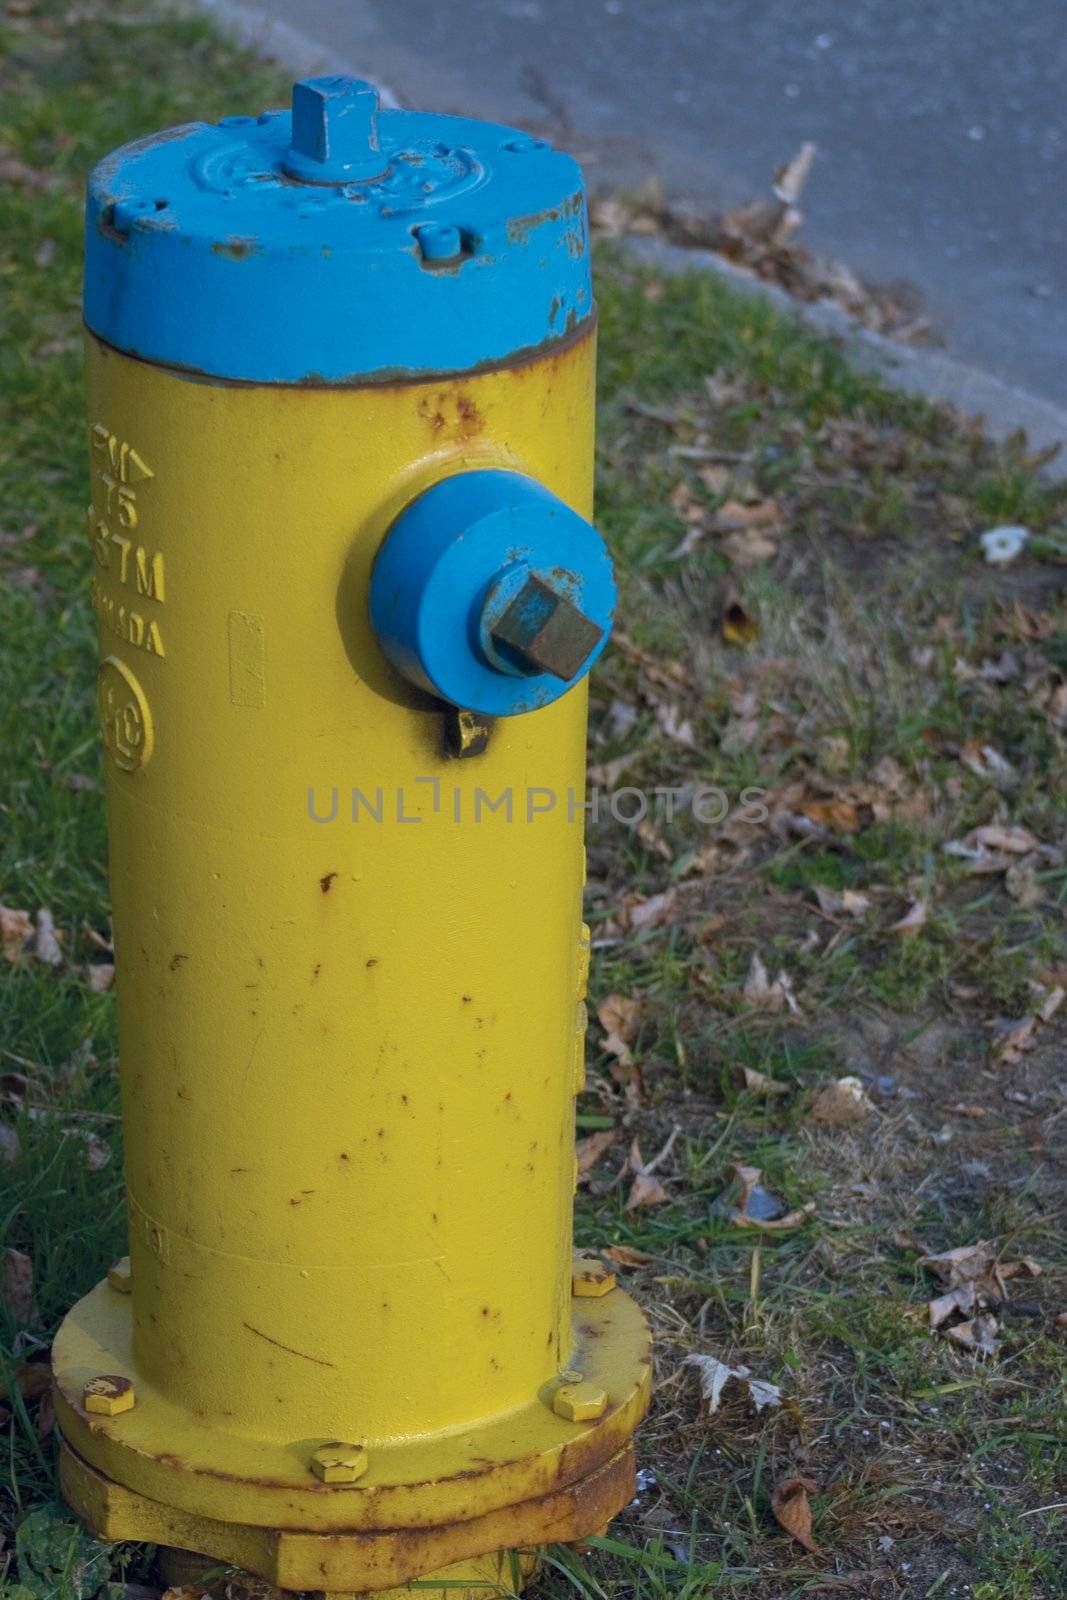 Trois-Rivi�re blue and yellow fire hydrant by mypstudio